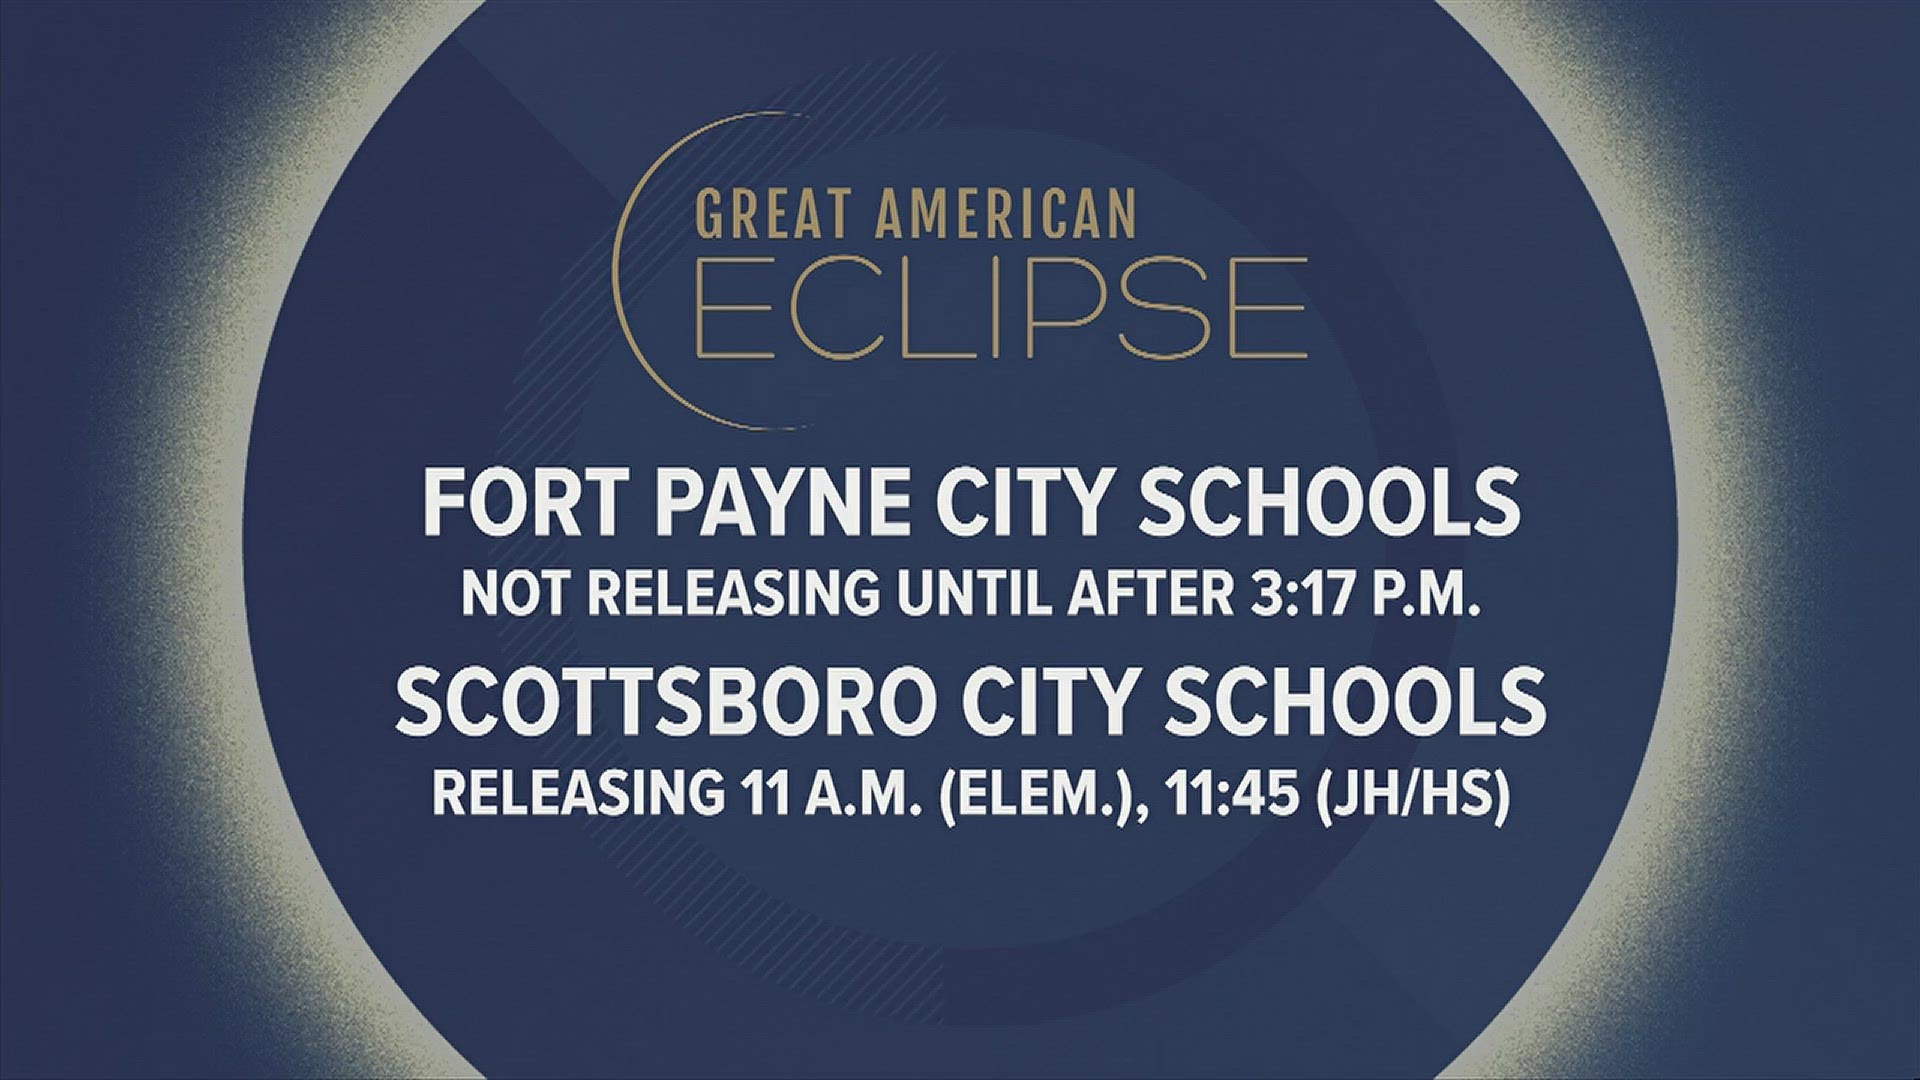 While we're not in the path of totality, Monday's solar eclipse will still impact some in North Alabama.